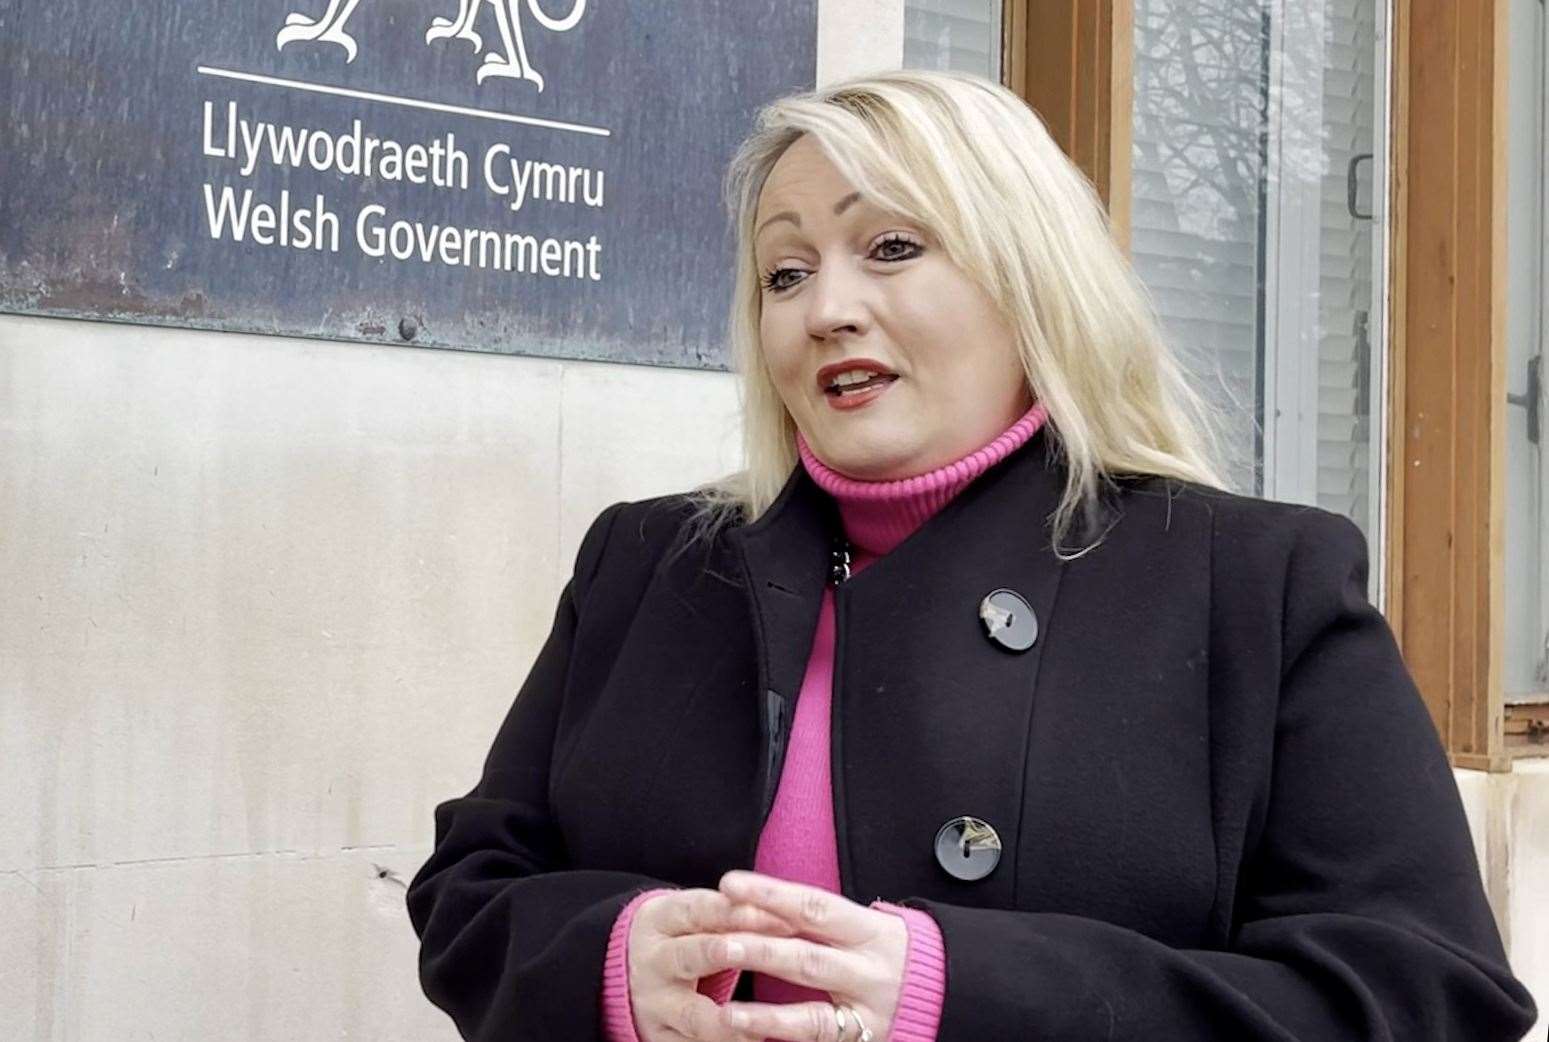 Welsh Finance minister Rebecca Evans criticised the budget saying it would “embed unfairness” across the country (PA)